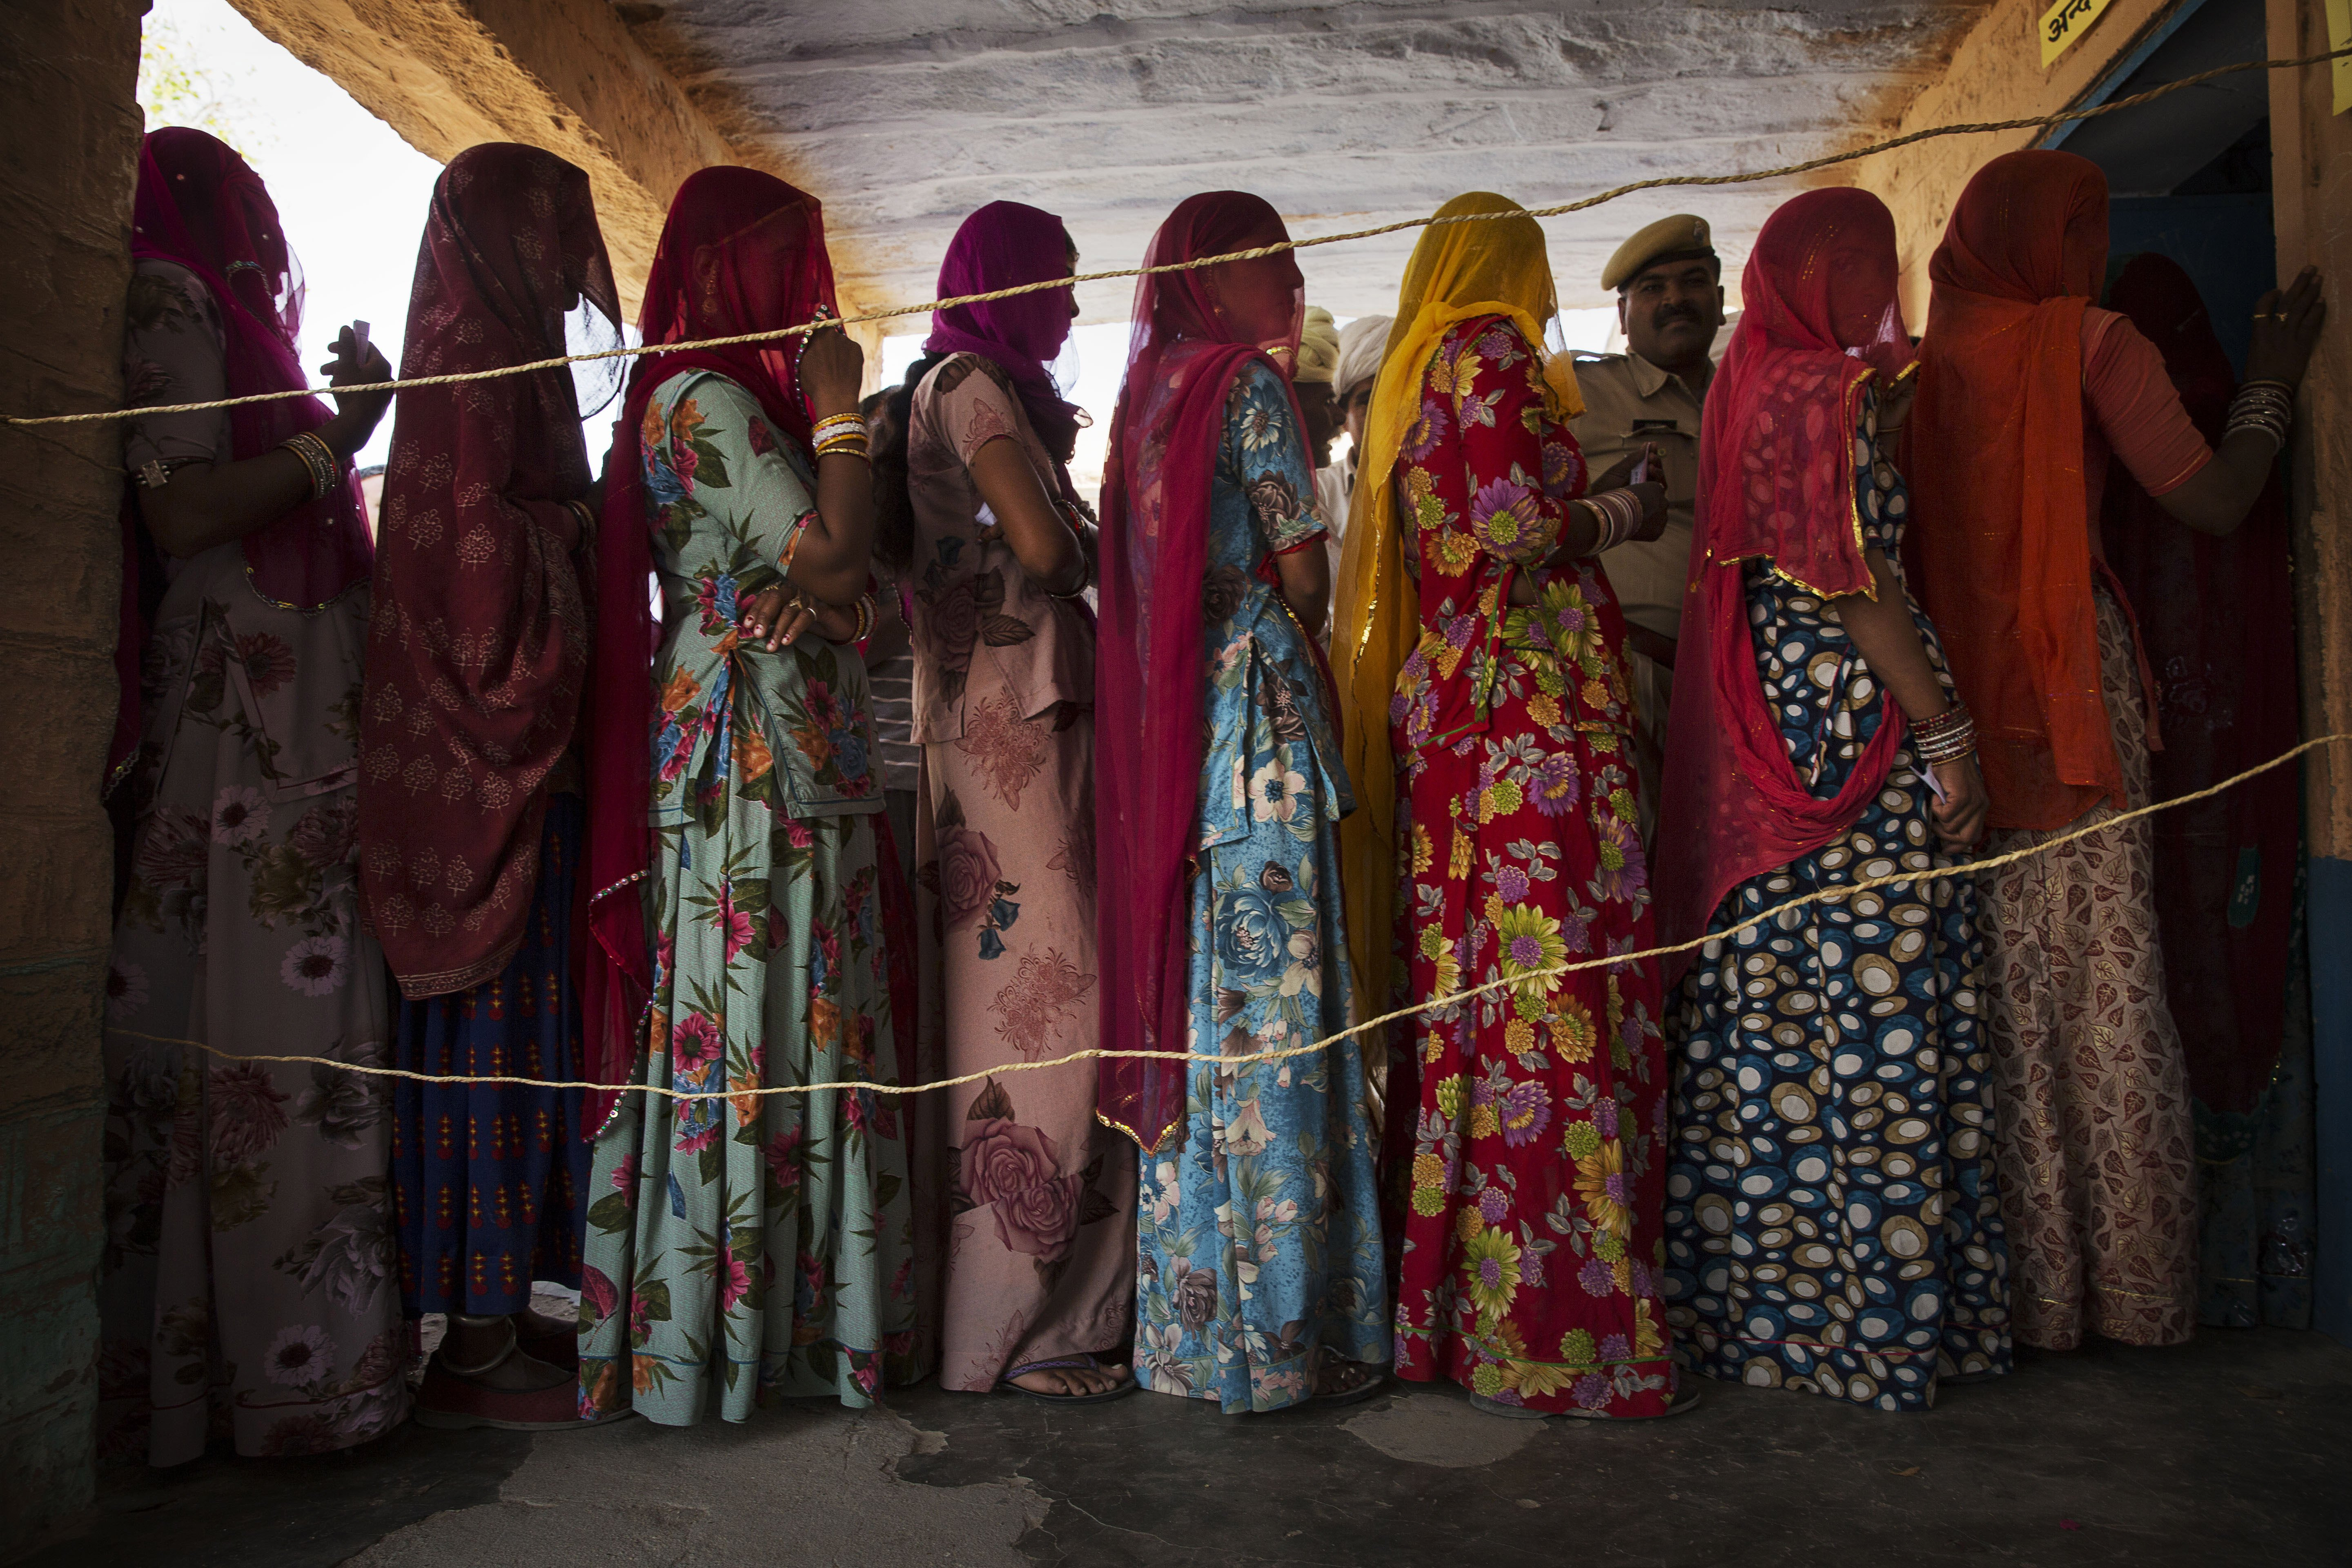 Women wait to vote at a polling station on April 17, 2014 in the Jodhpur District in the desert state of Rajasthan.